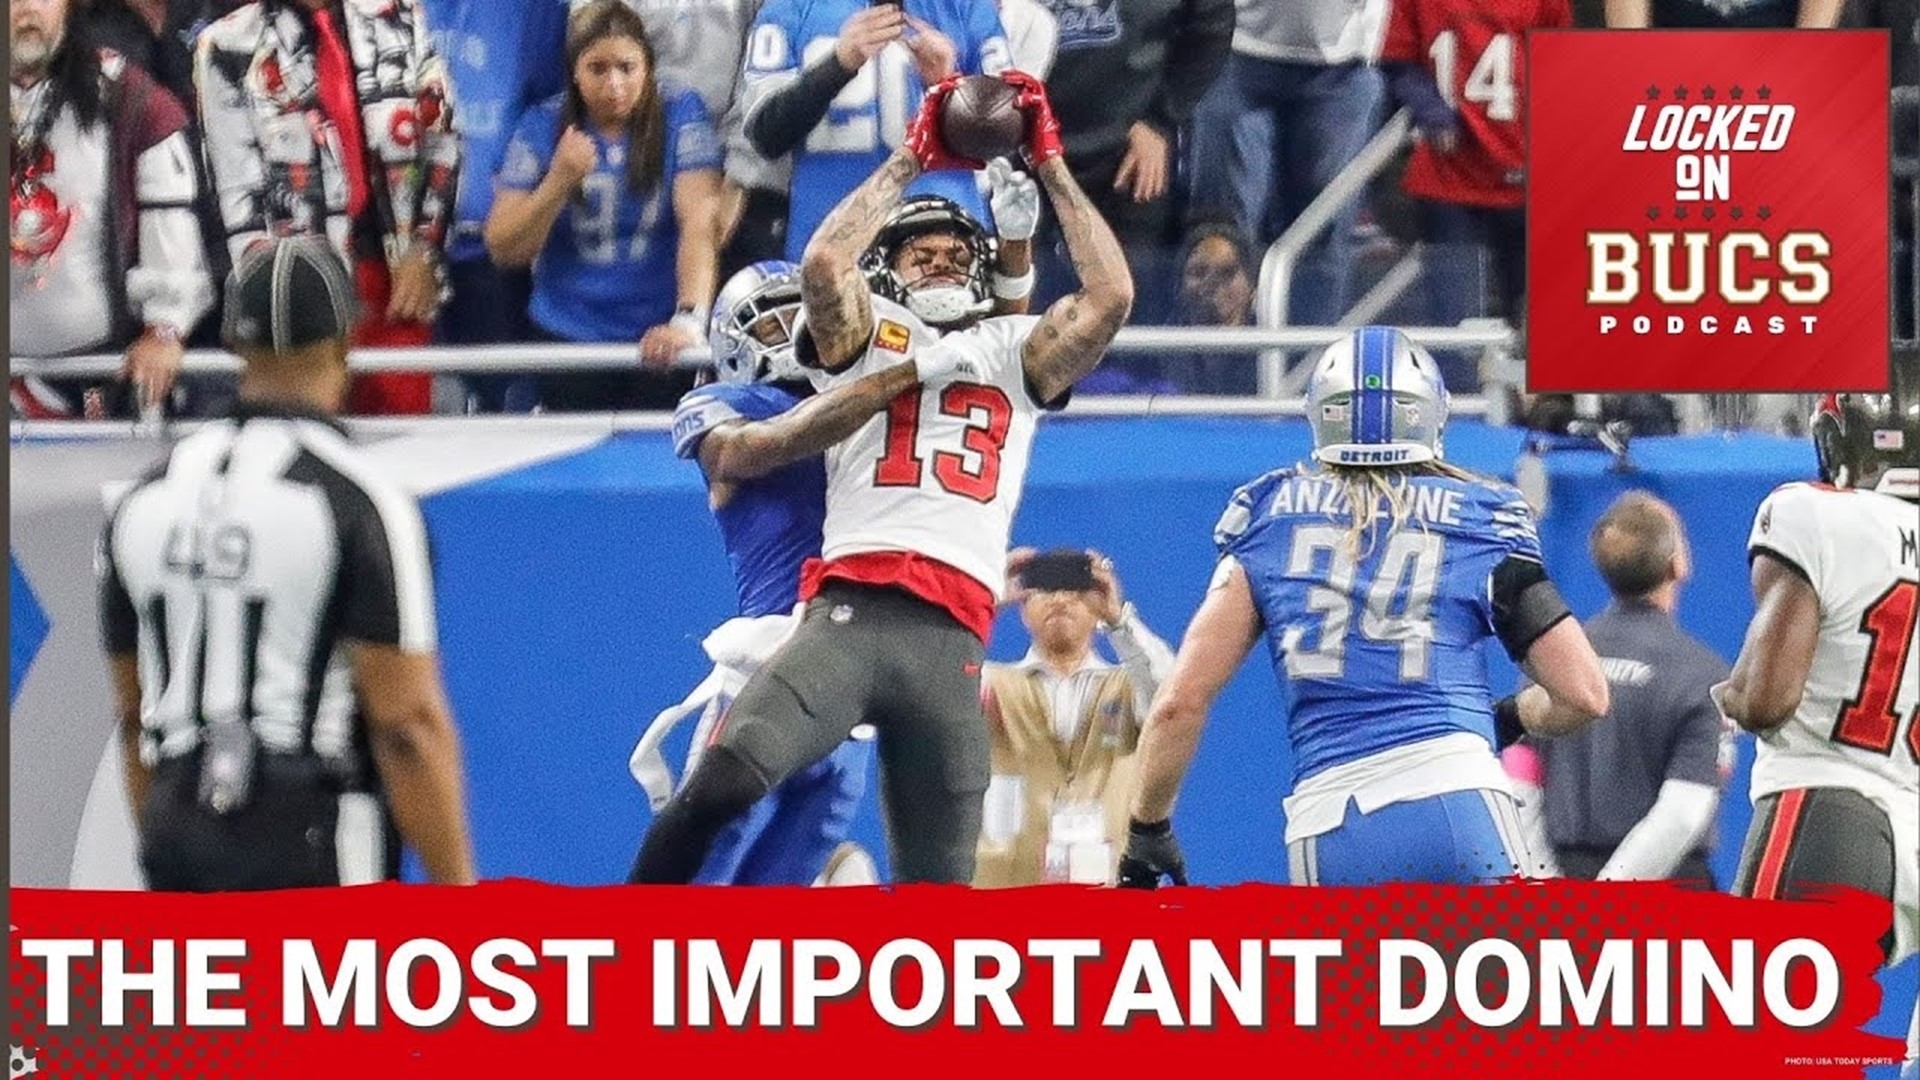 Tampa Bay Buccaneers bringing back Mike Evans was the biggest domino to fall this offseason - but how will that play into everything else?